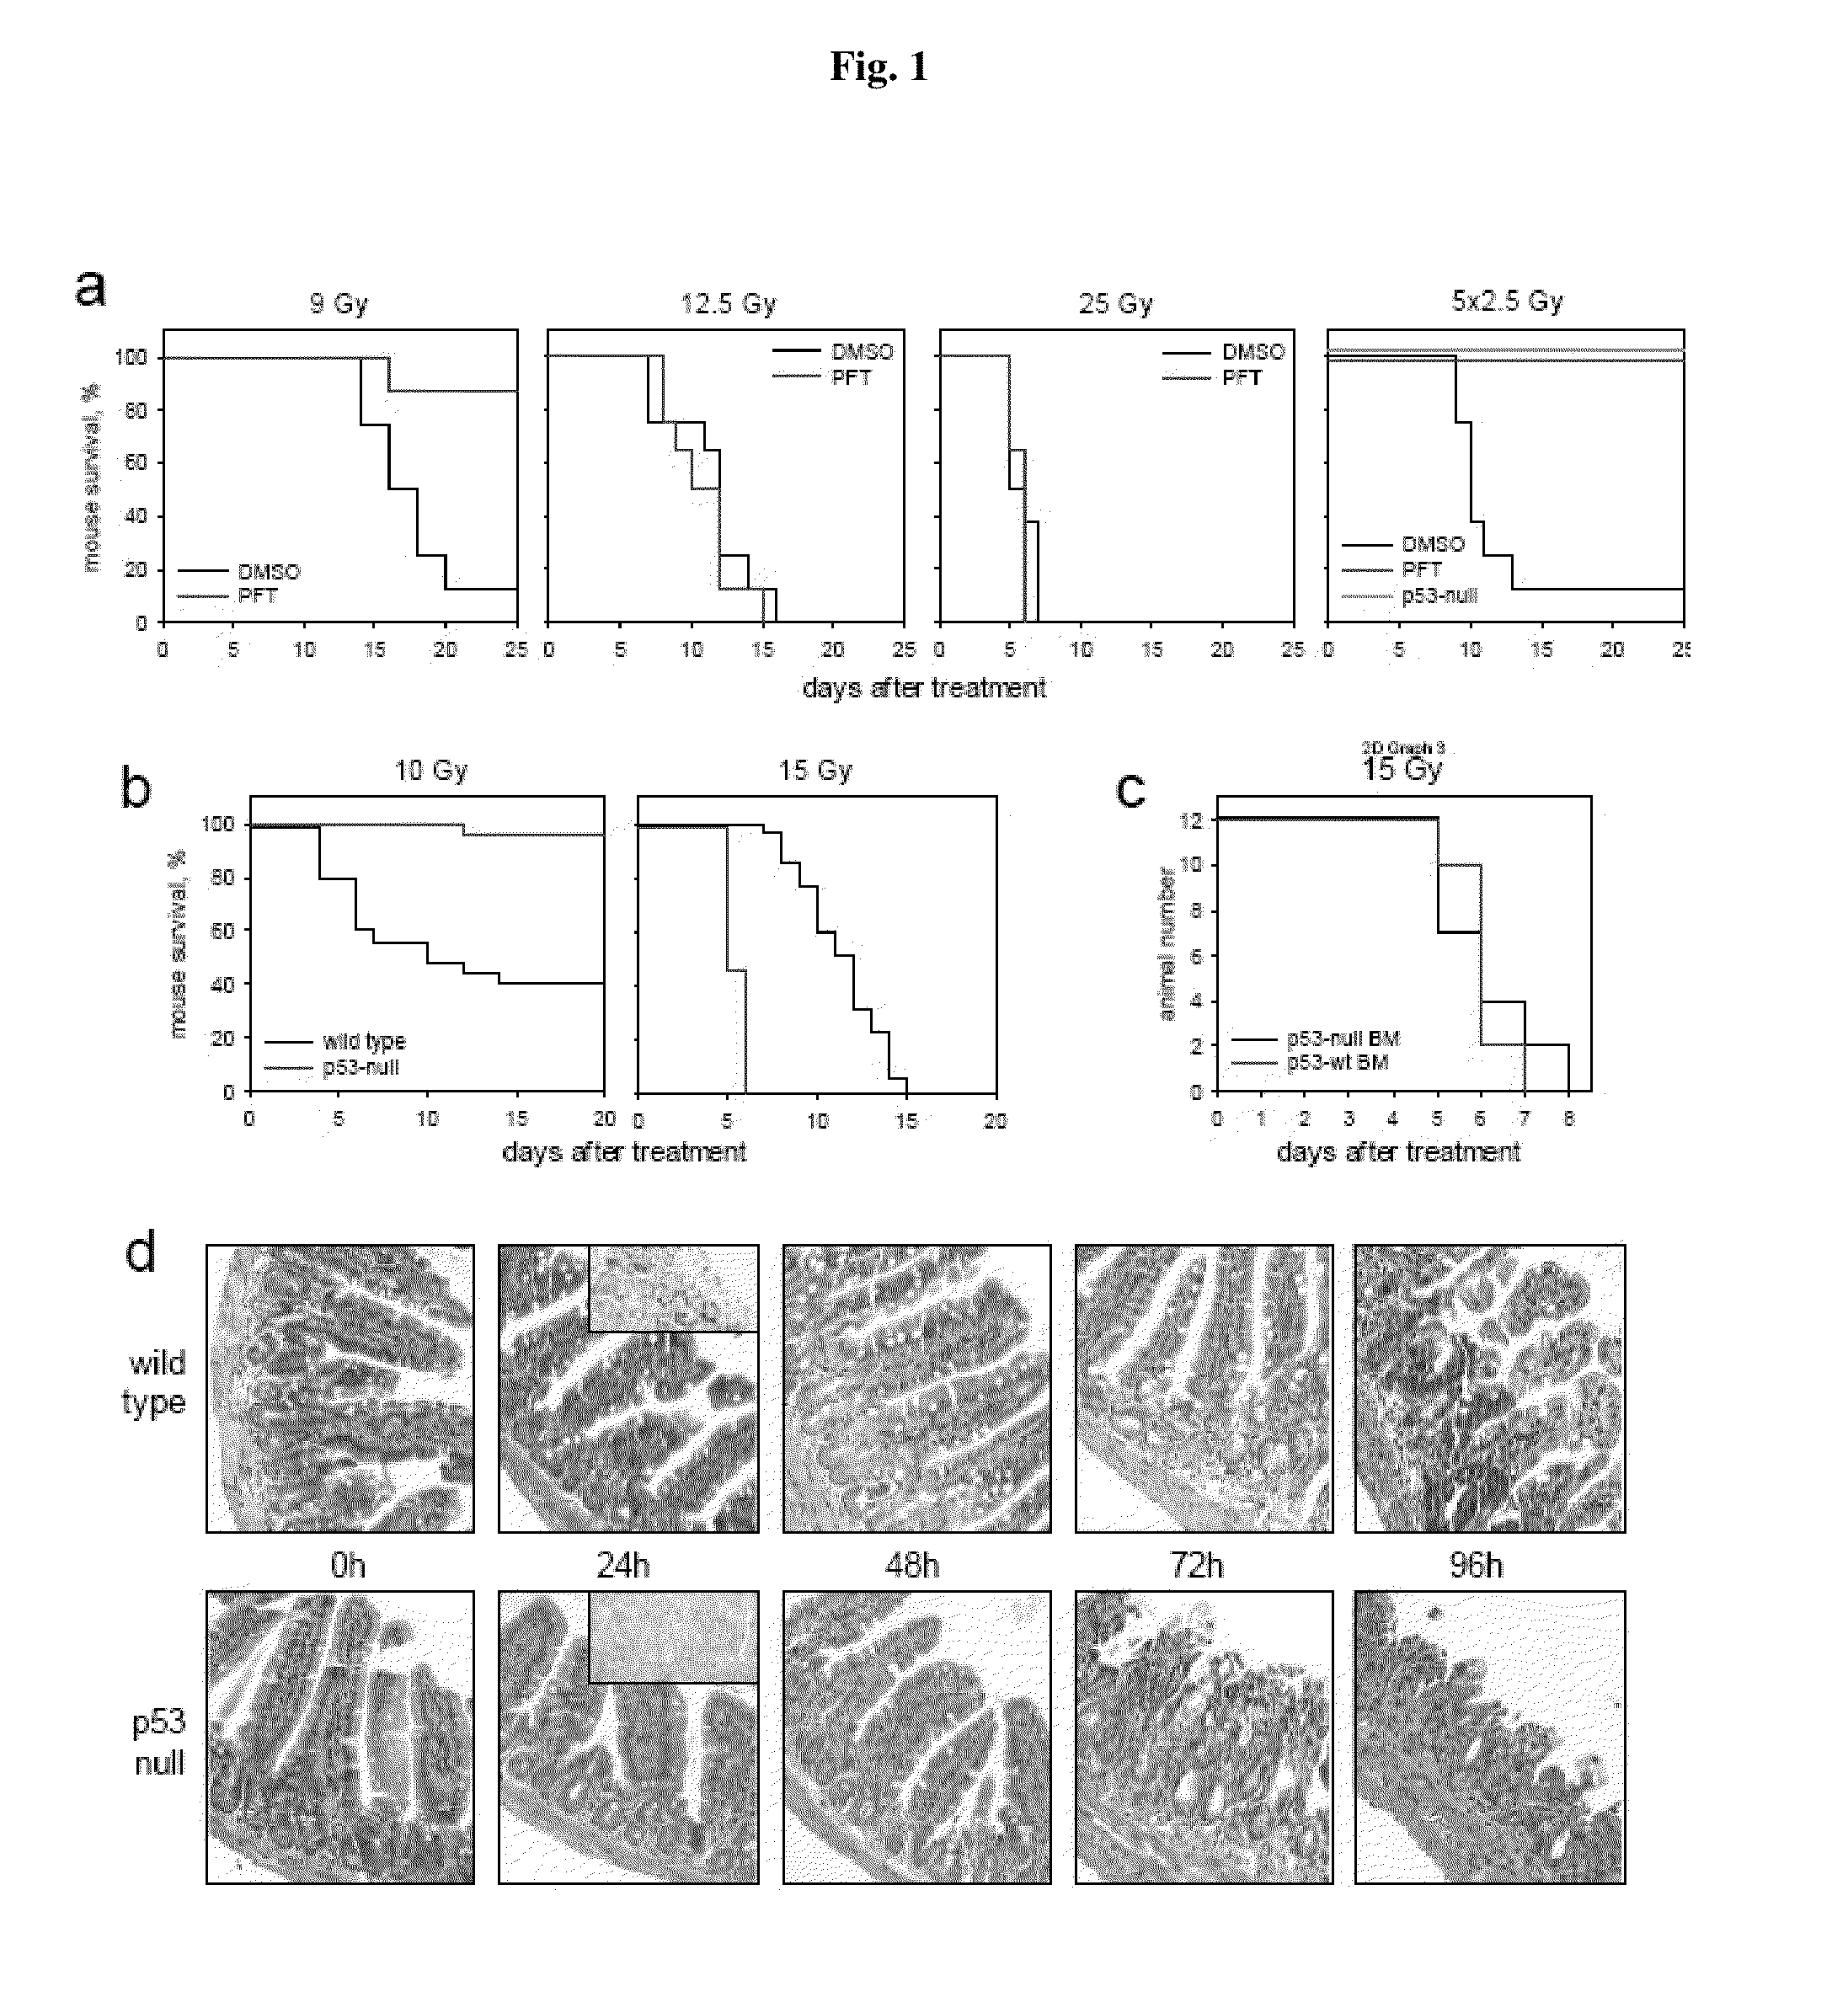 Method for reducing the effects of chemotherapy using flagellin related polypeptides